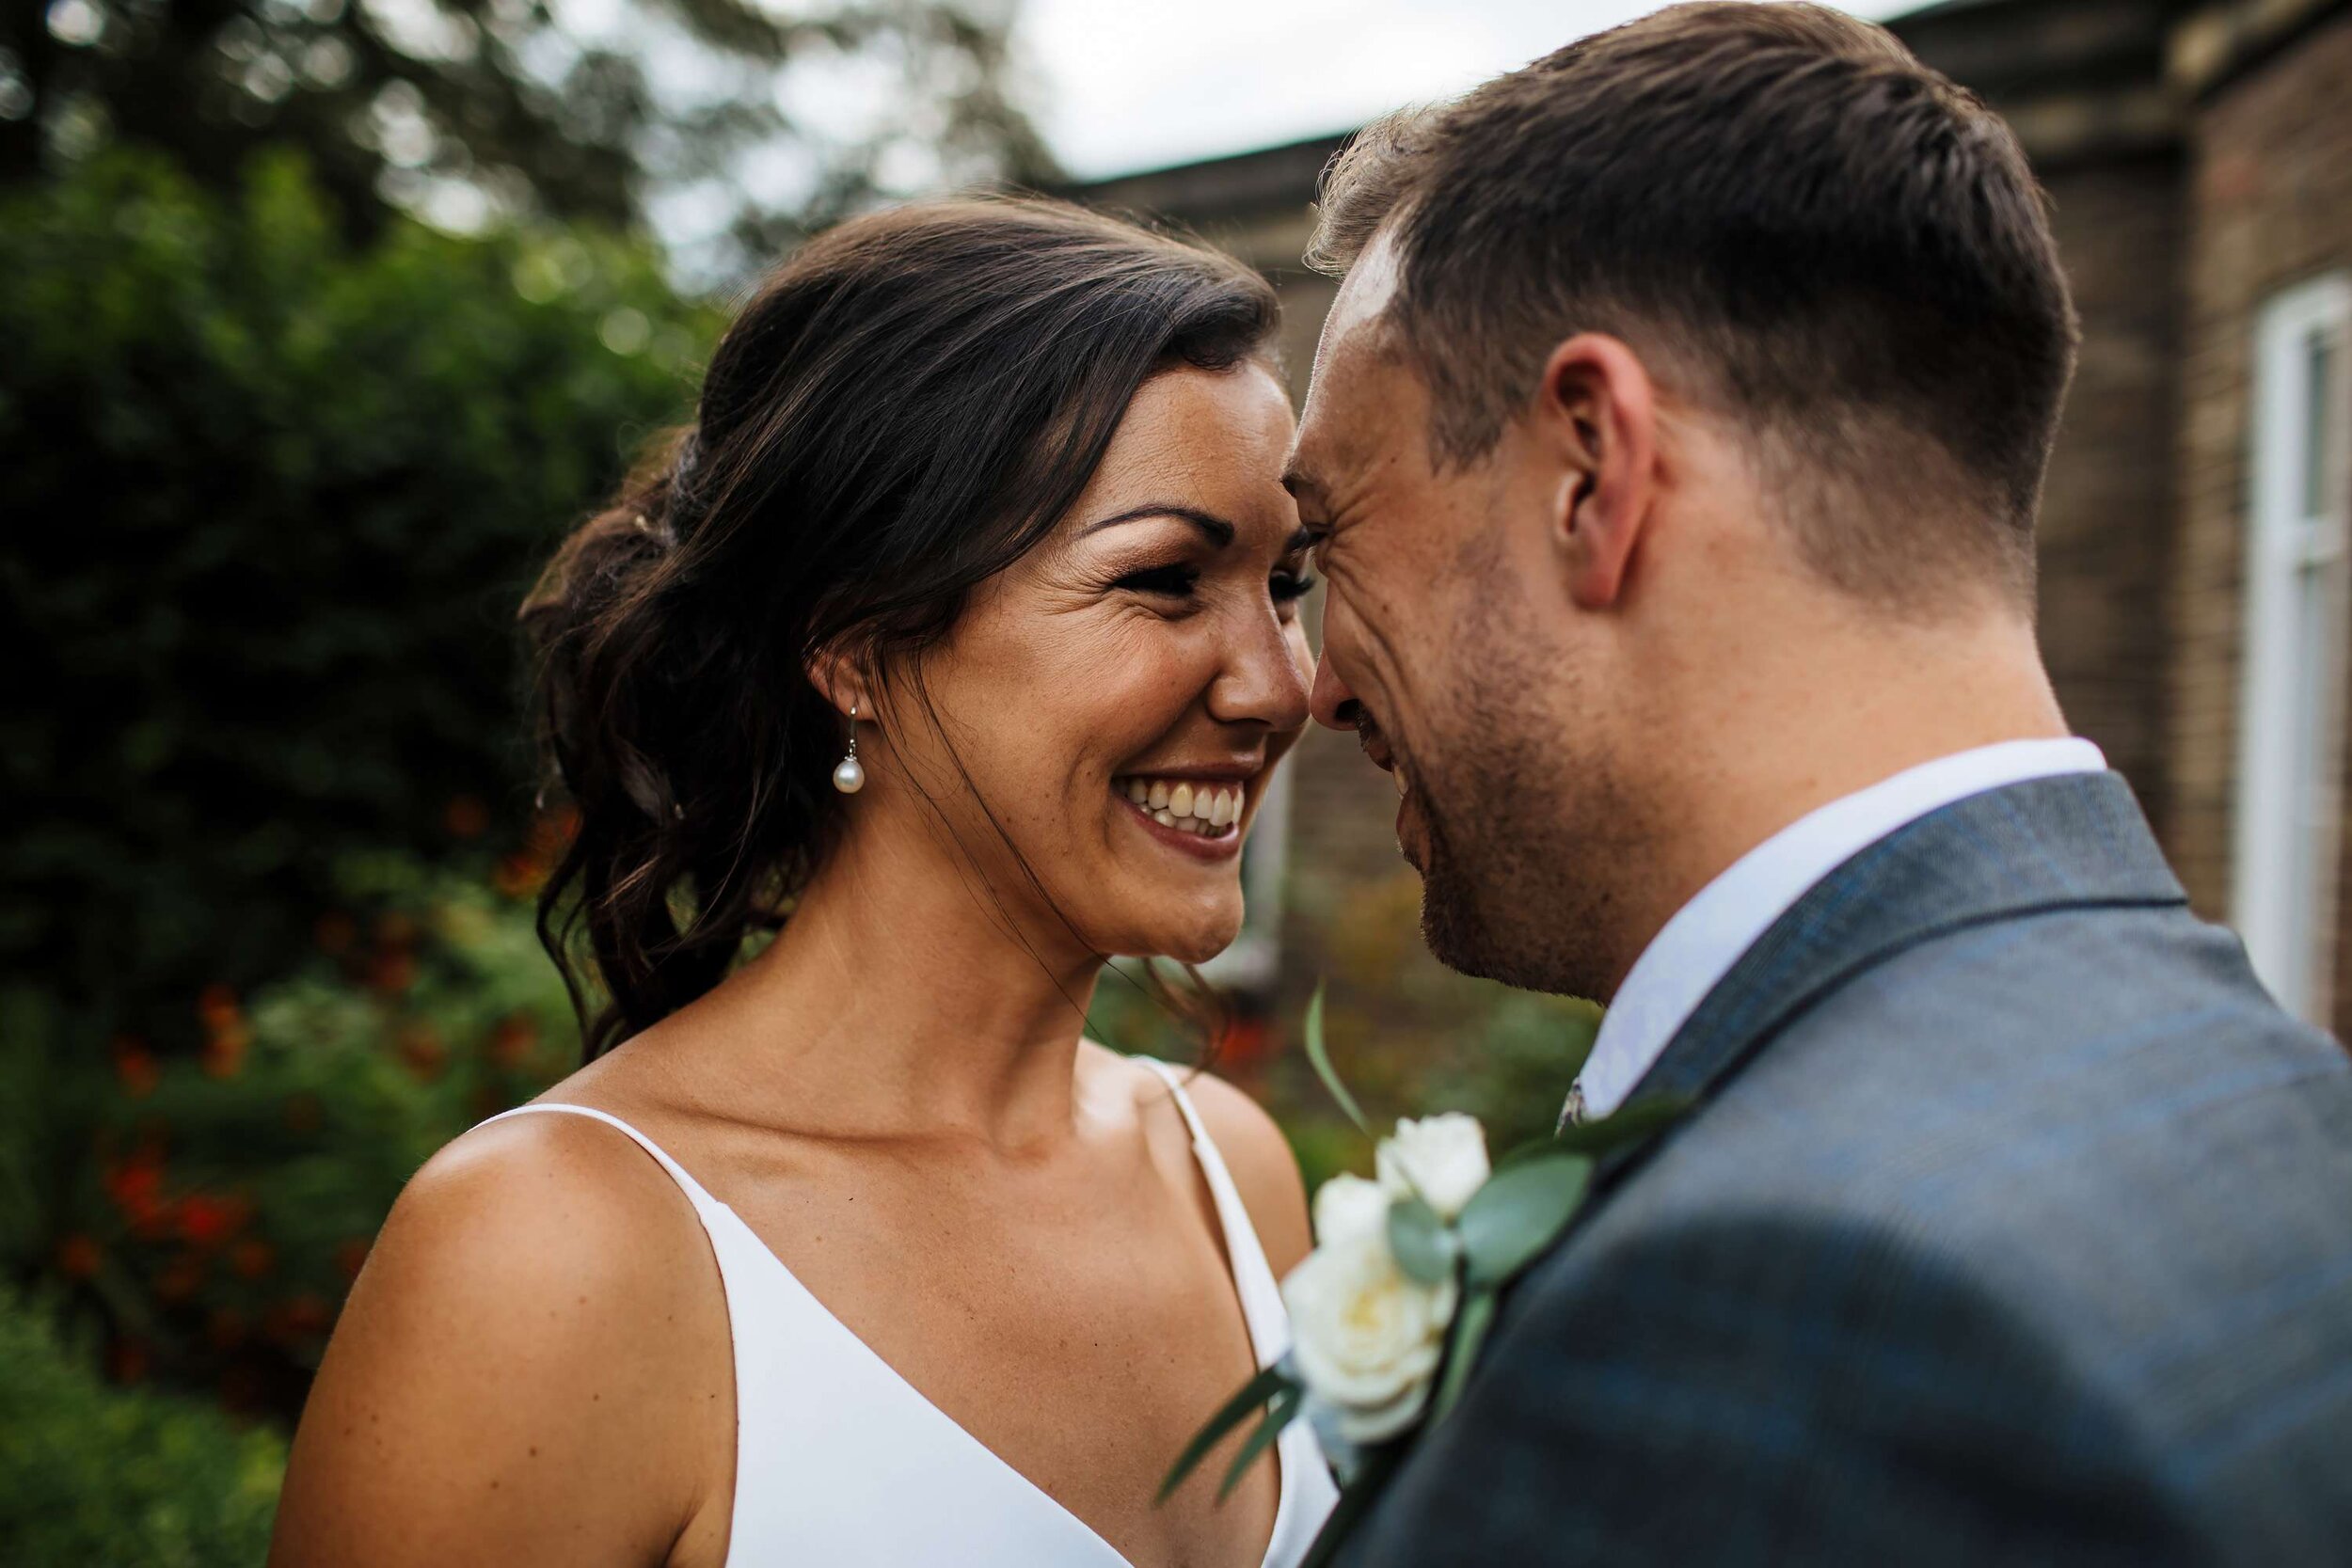 Bride and groom share a moment at their Yorkshire wedding